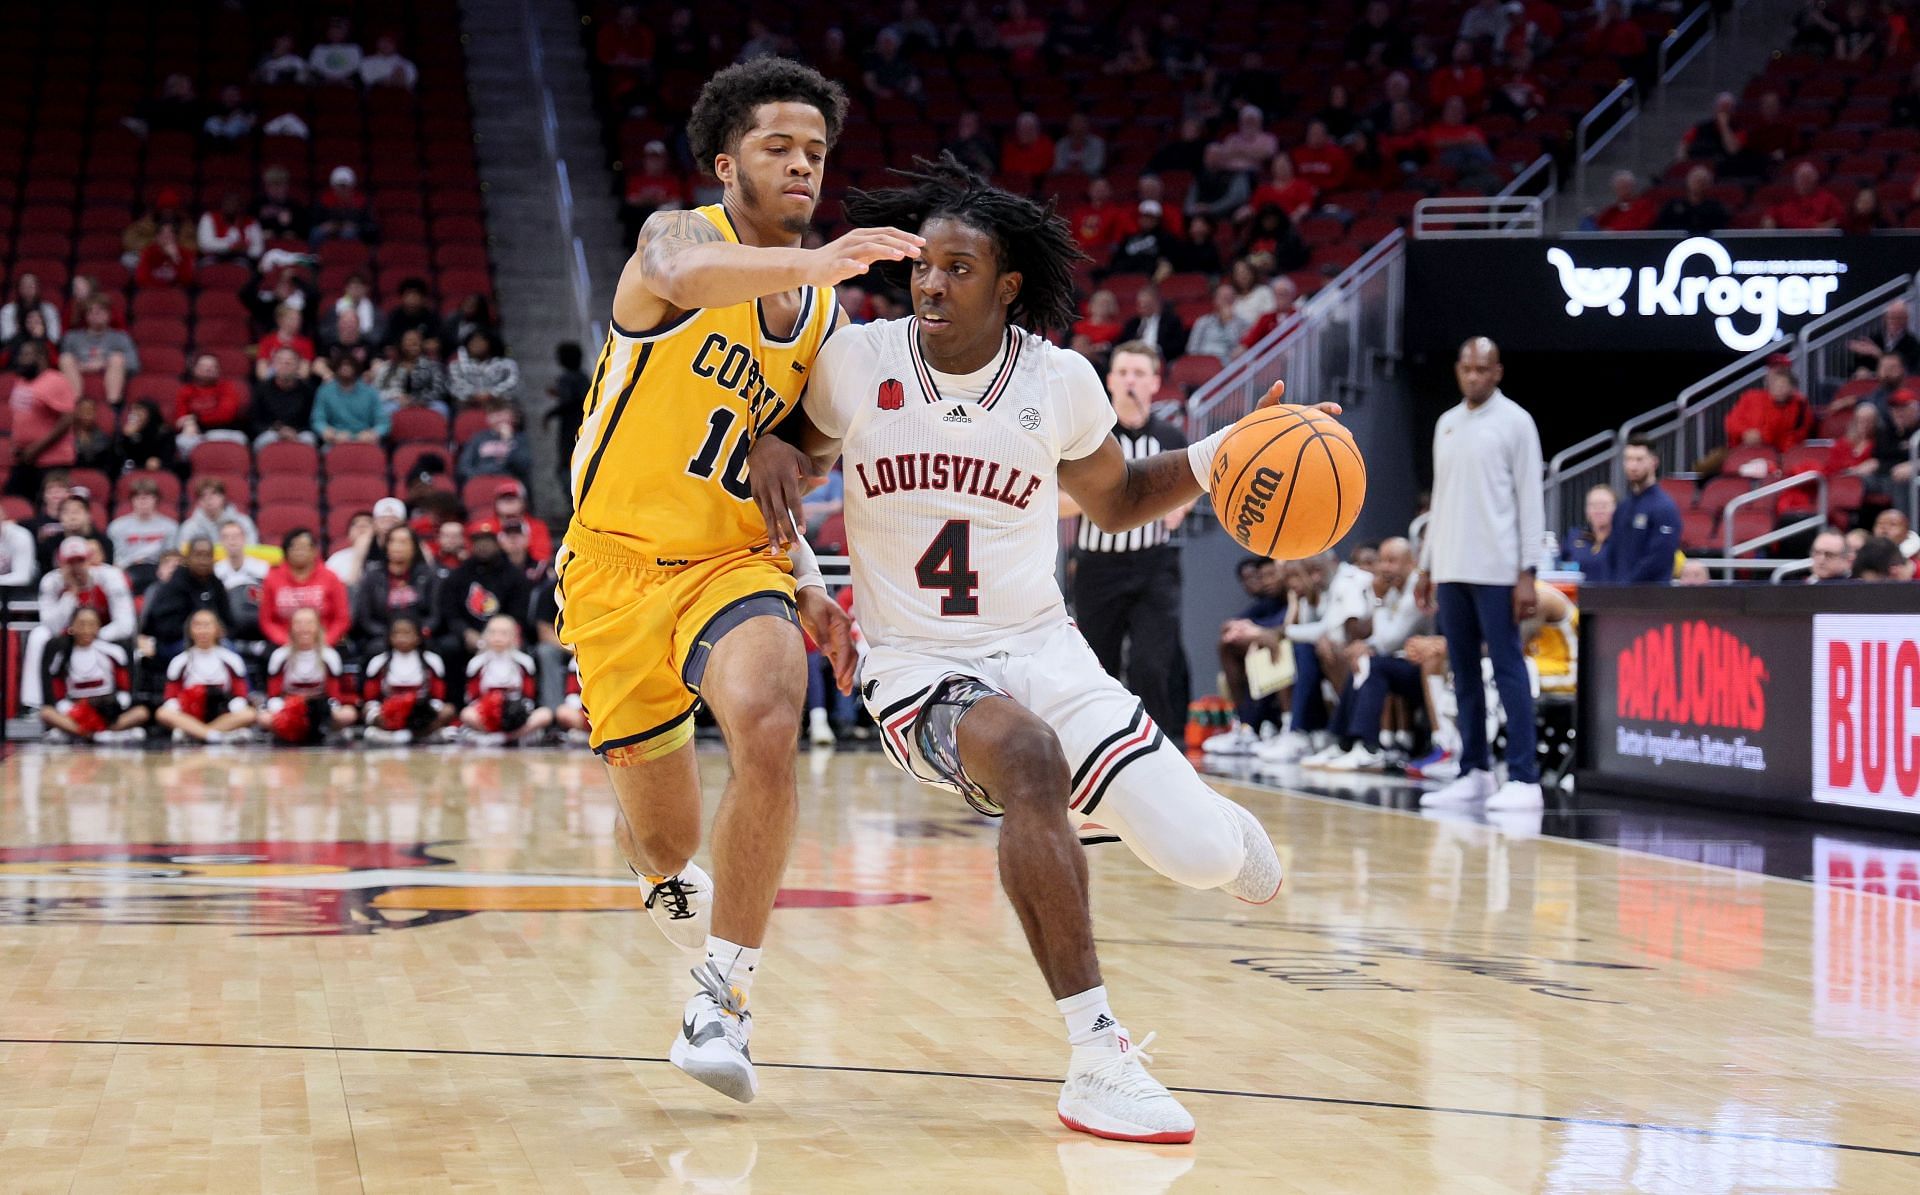 Coppin State, shown here against Louisville, may be missing a key player in a home game against Howard.